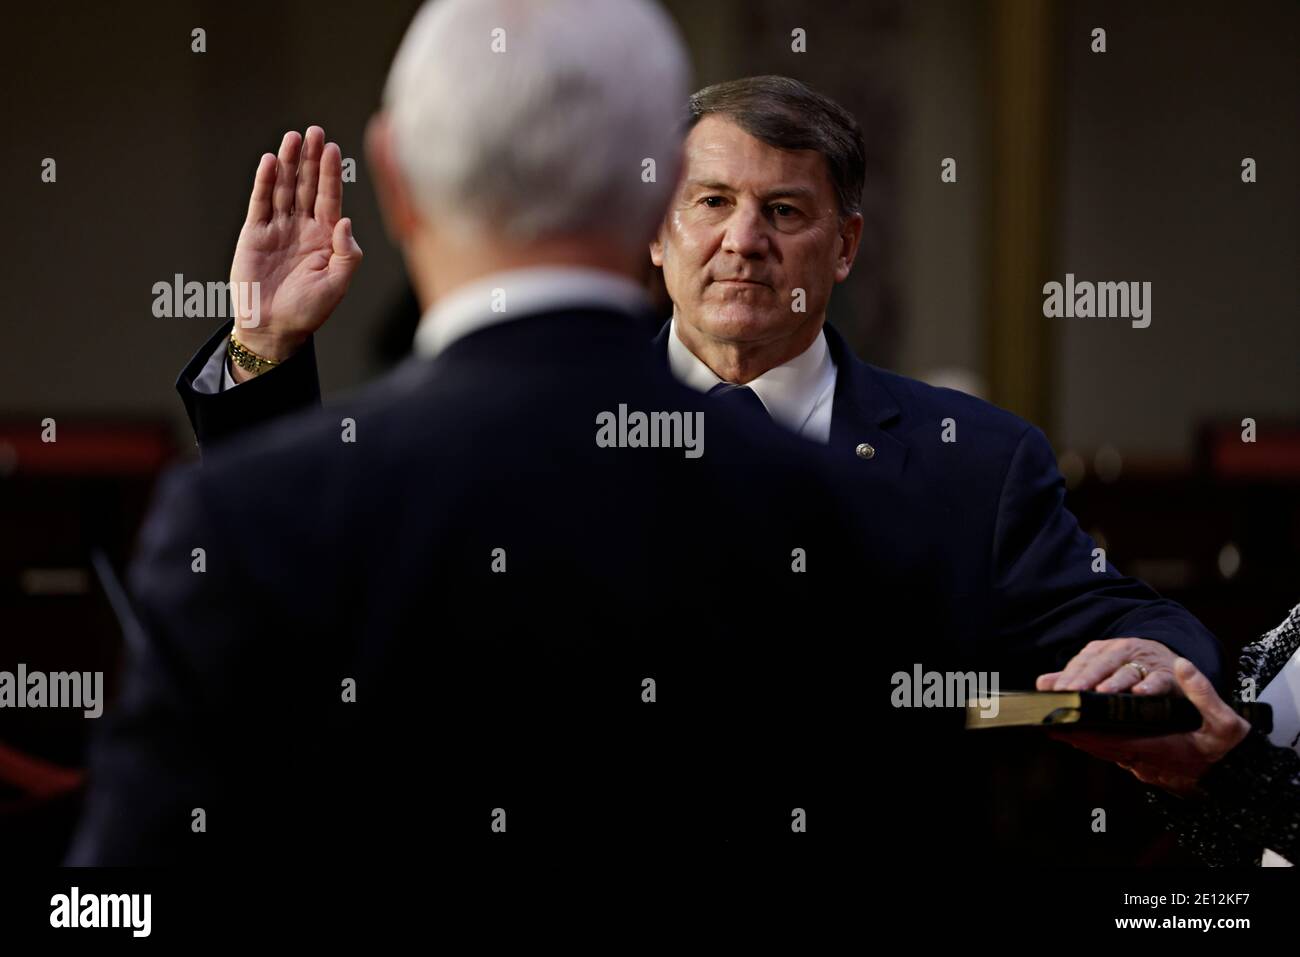 United States Senator Mike Rounds (Republican of South Dakota), center, is ceremoniously sworn-in by U.S. Vice President Mike Pence, left, at the U.S. Capitol in Washington, DC, U.S., on Sunday, Jan. 3, 2021. The 117th Congress begins today with the election of the speaker of the House and administration of the oath of office for lawmakers in both chambers, procedures that will be modified to account for Covid-19 precautions. Credit: Samuel Corum/Pool via CNP/MediaPunch Stock Photo